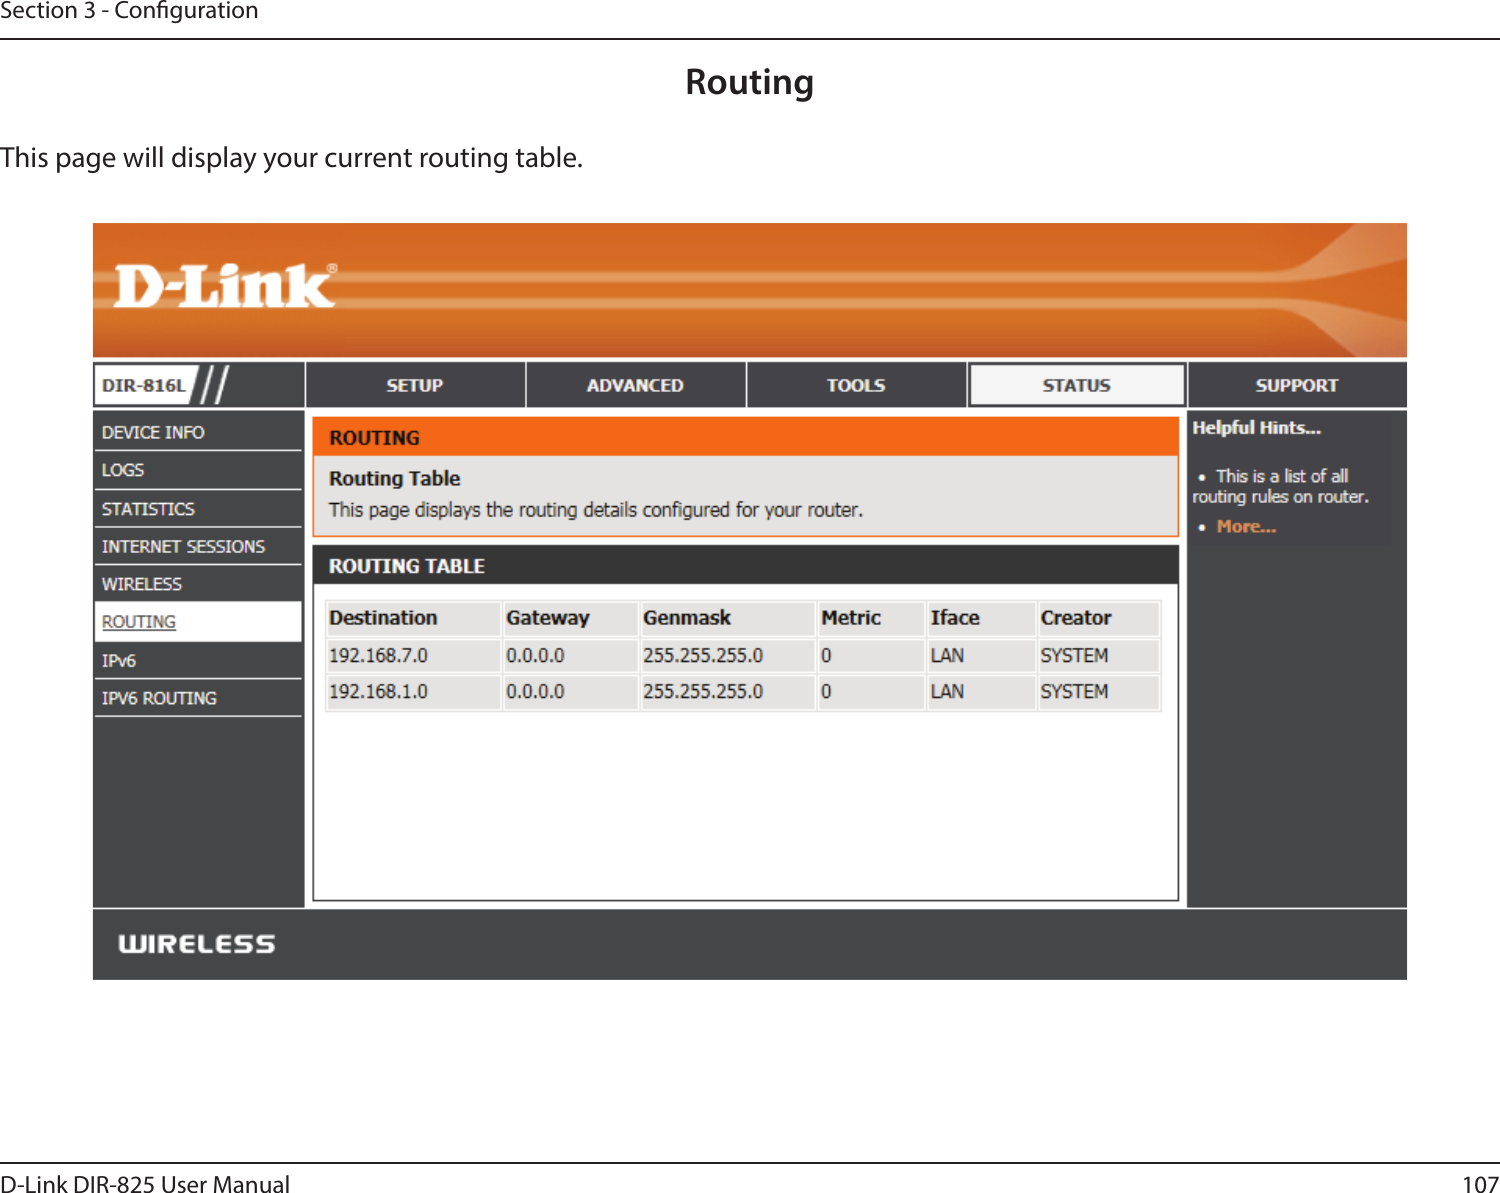 107D-Link DIR-825 User ManualSection 3 - CongurationRoutingThis page will display your current routing table.